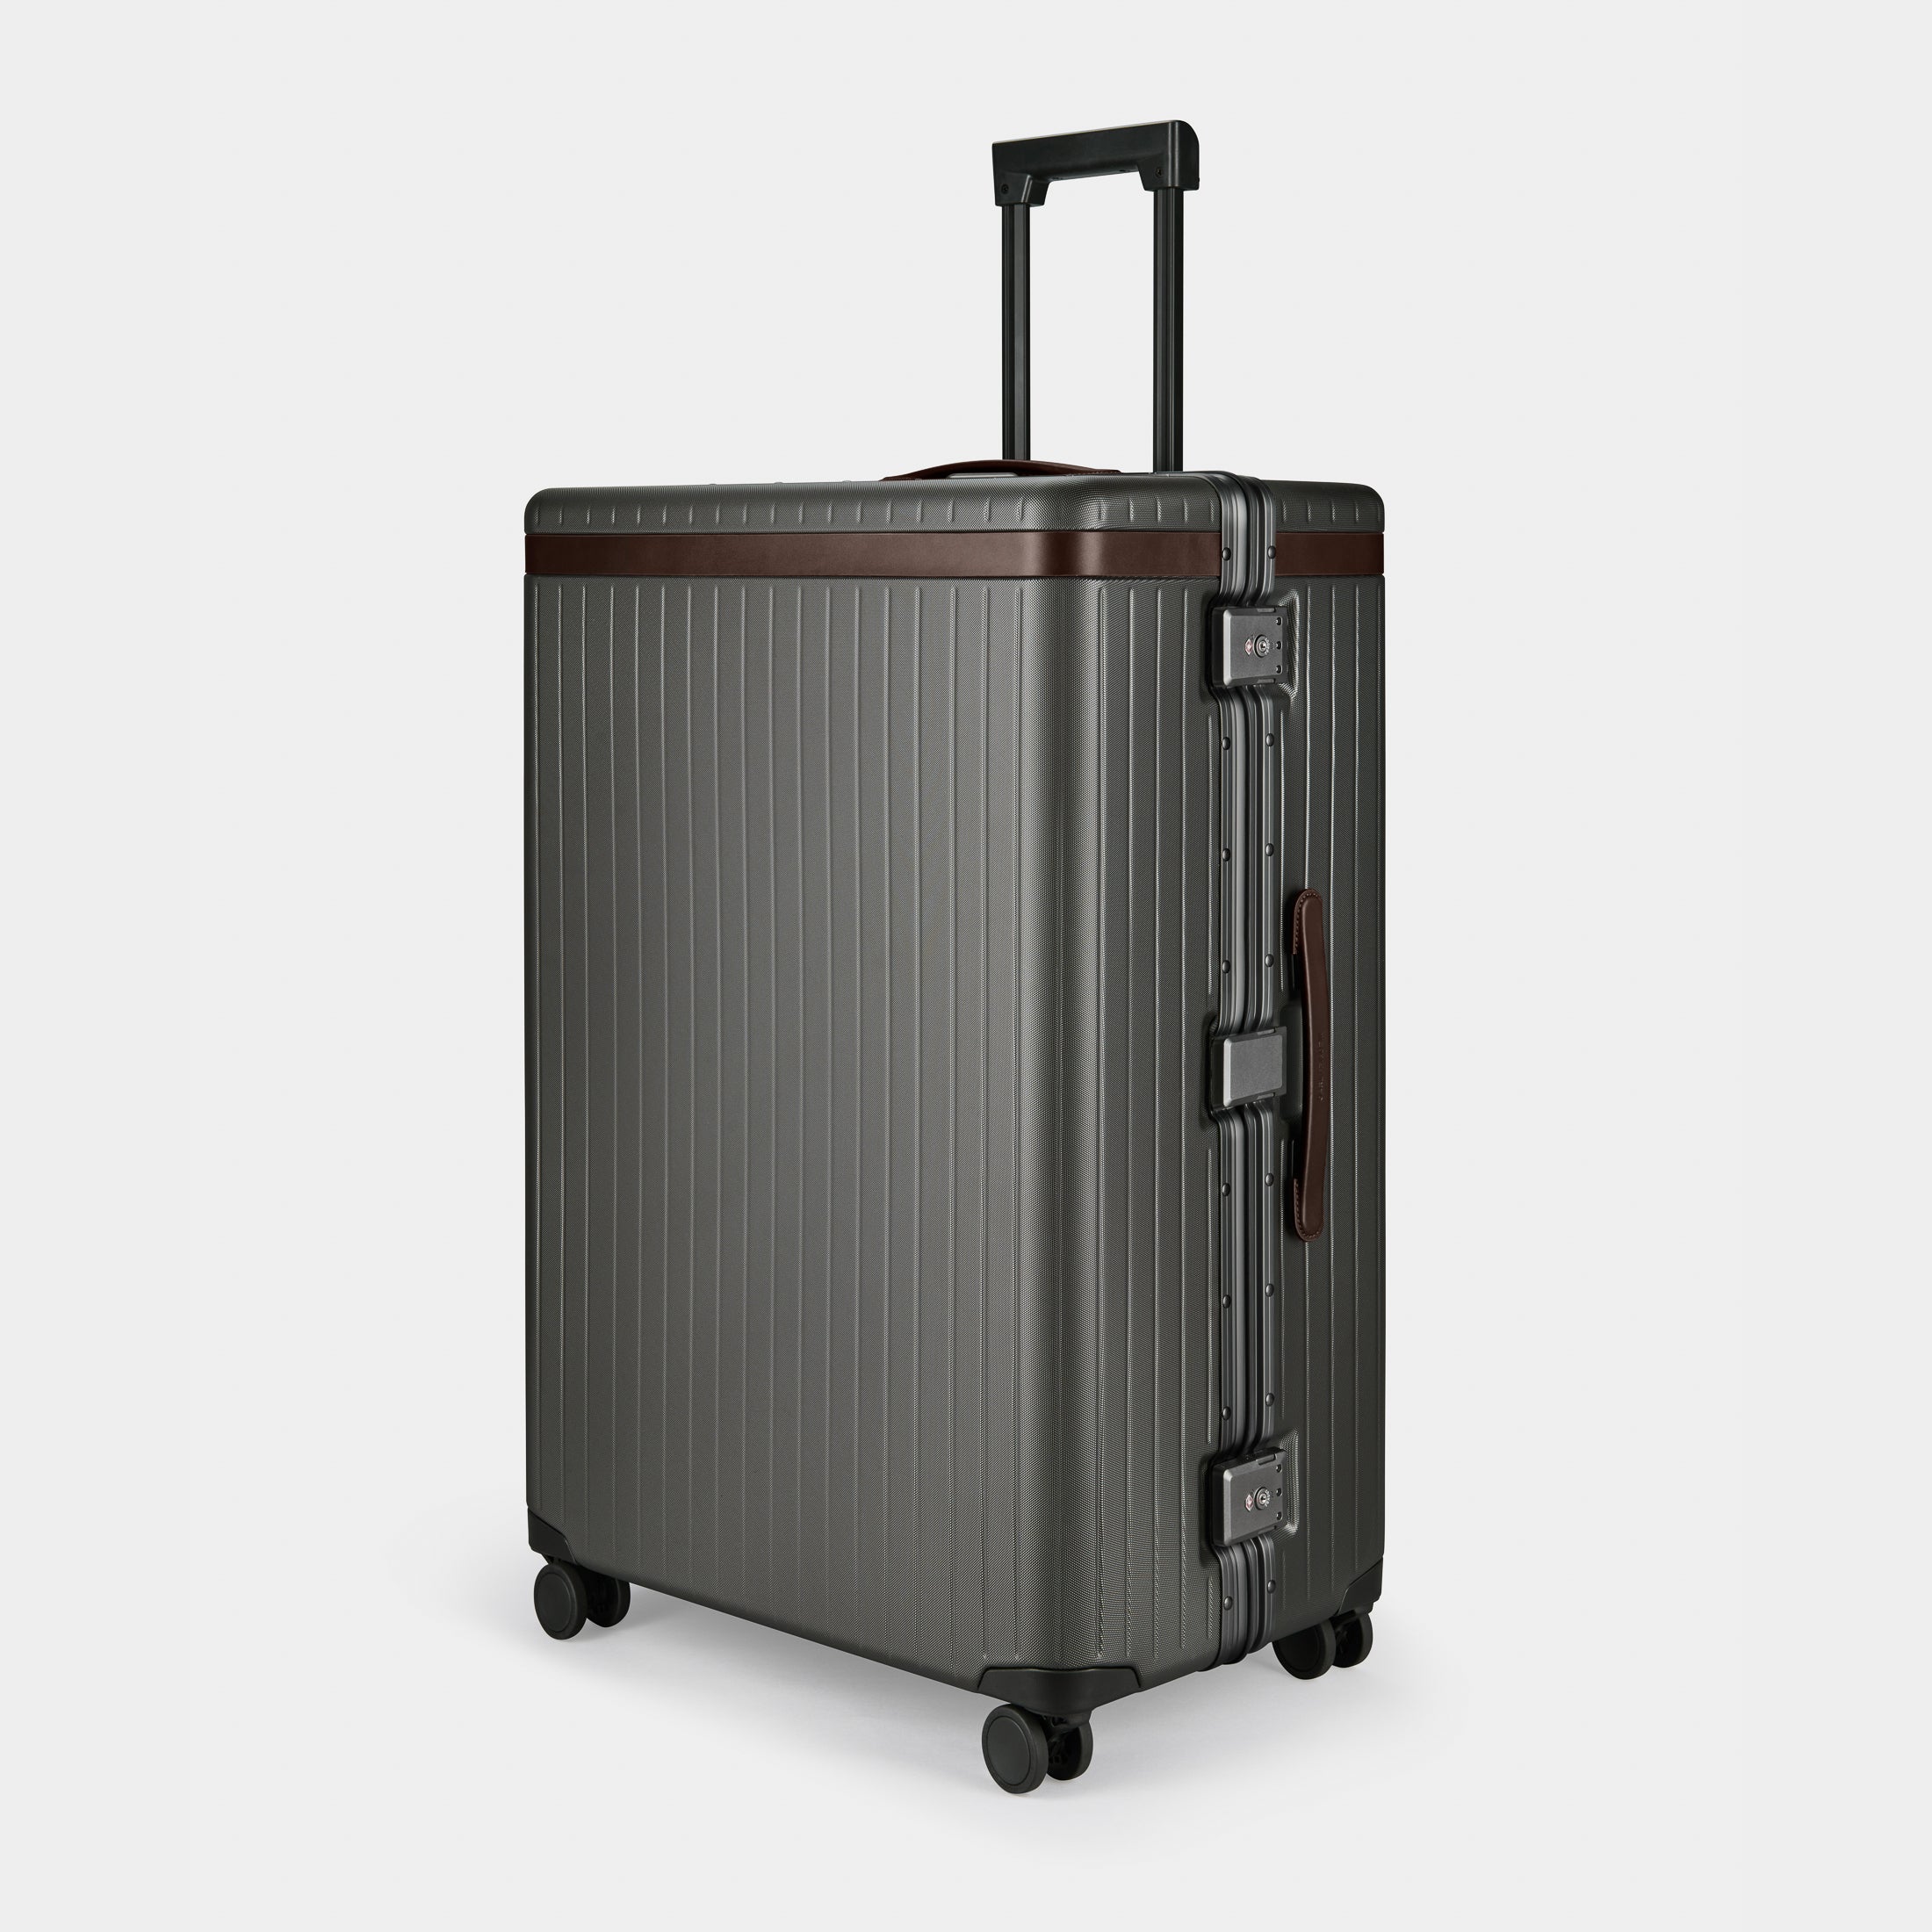 The Large Check-in - Return Grey / Chocolate / Dotted Extra-large hard-shell suitcase